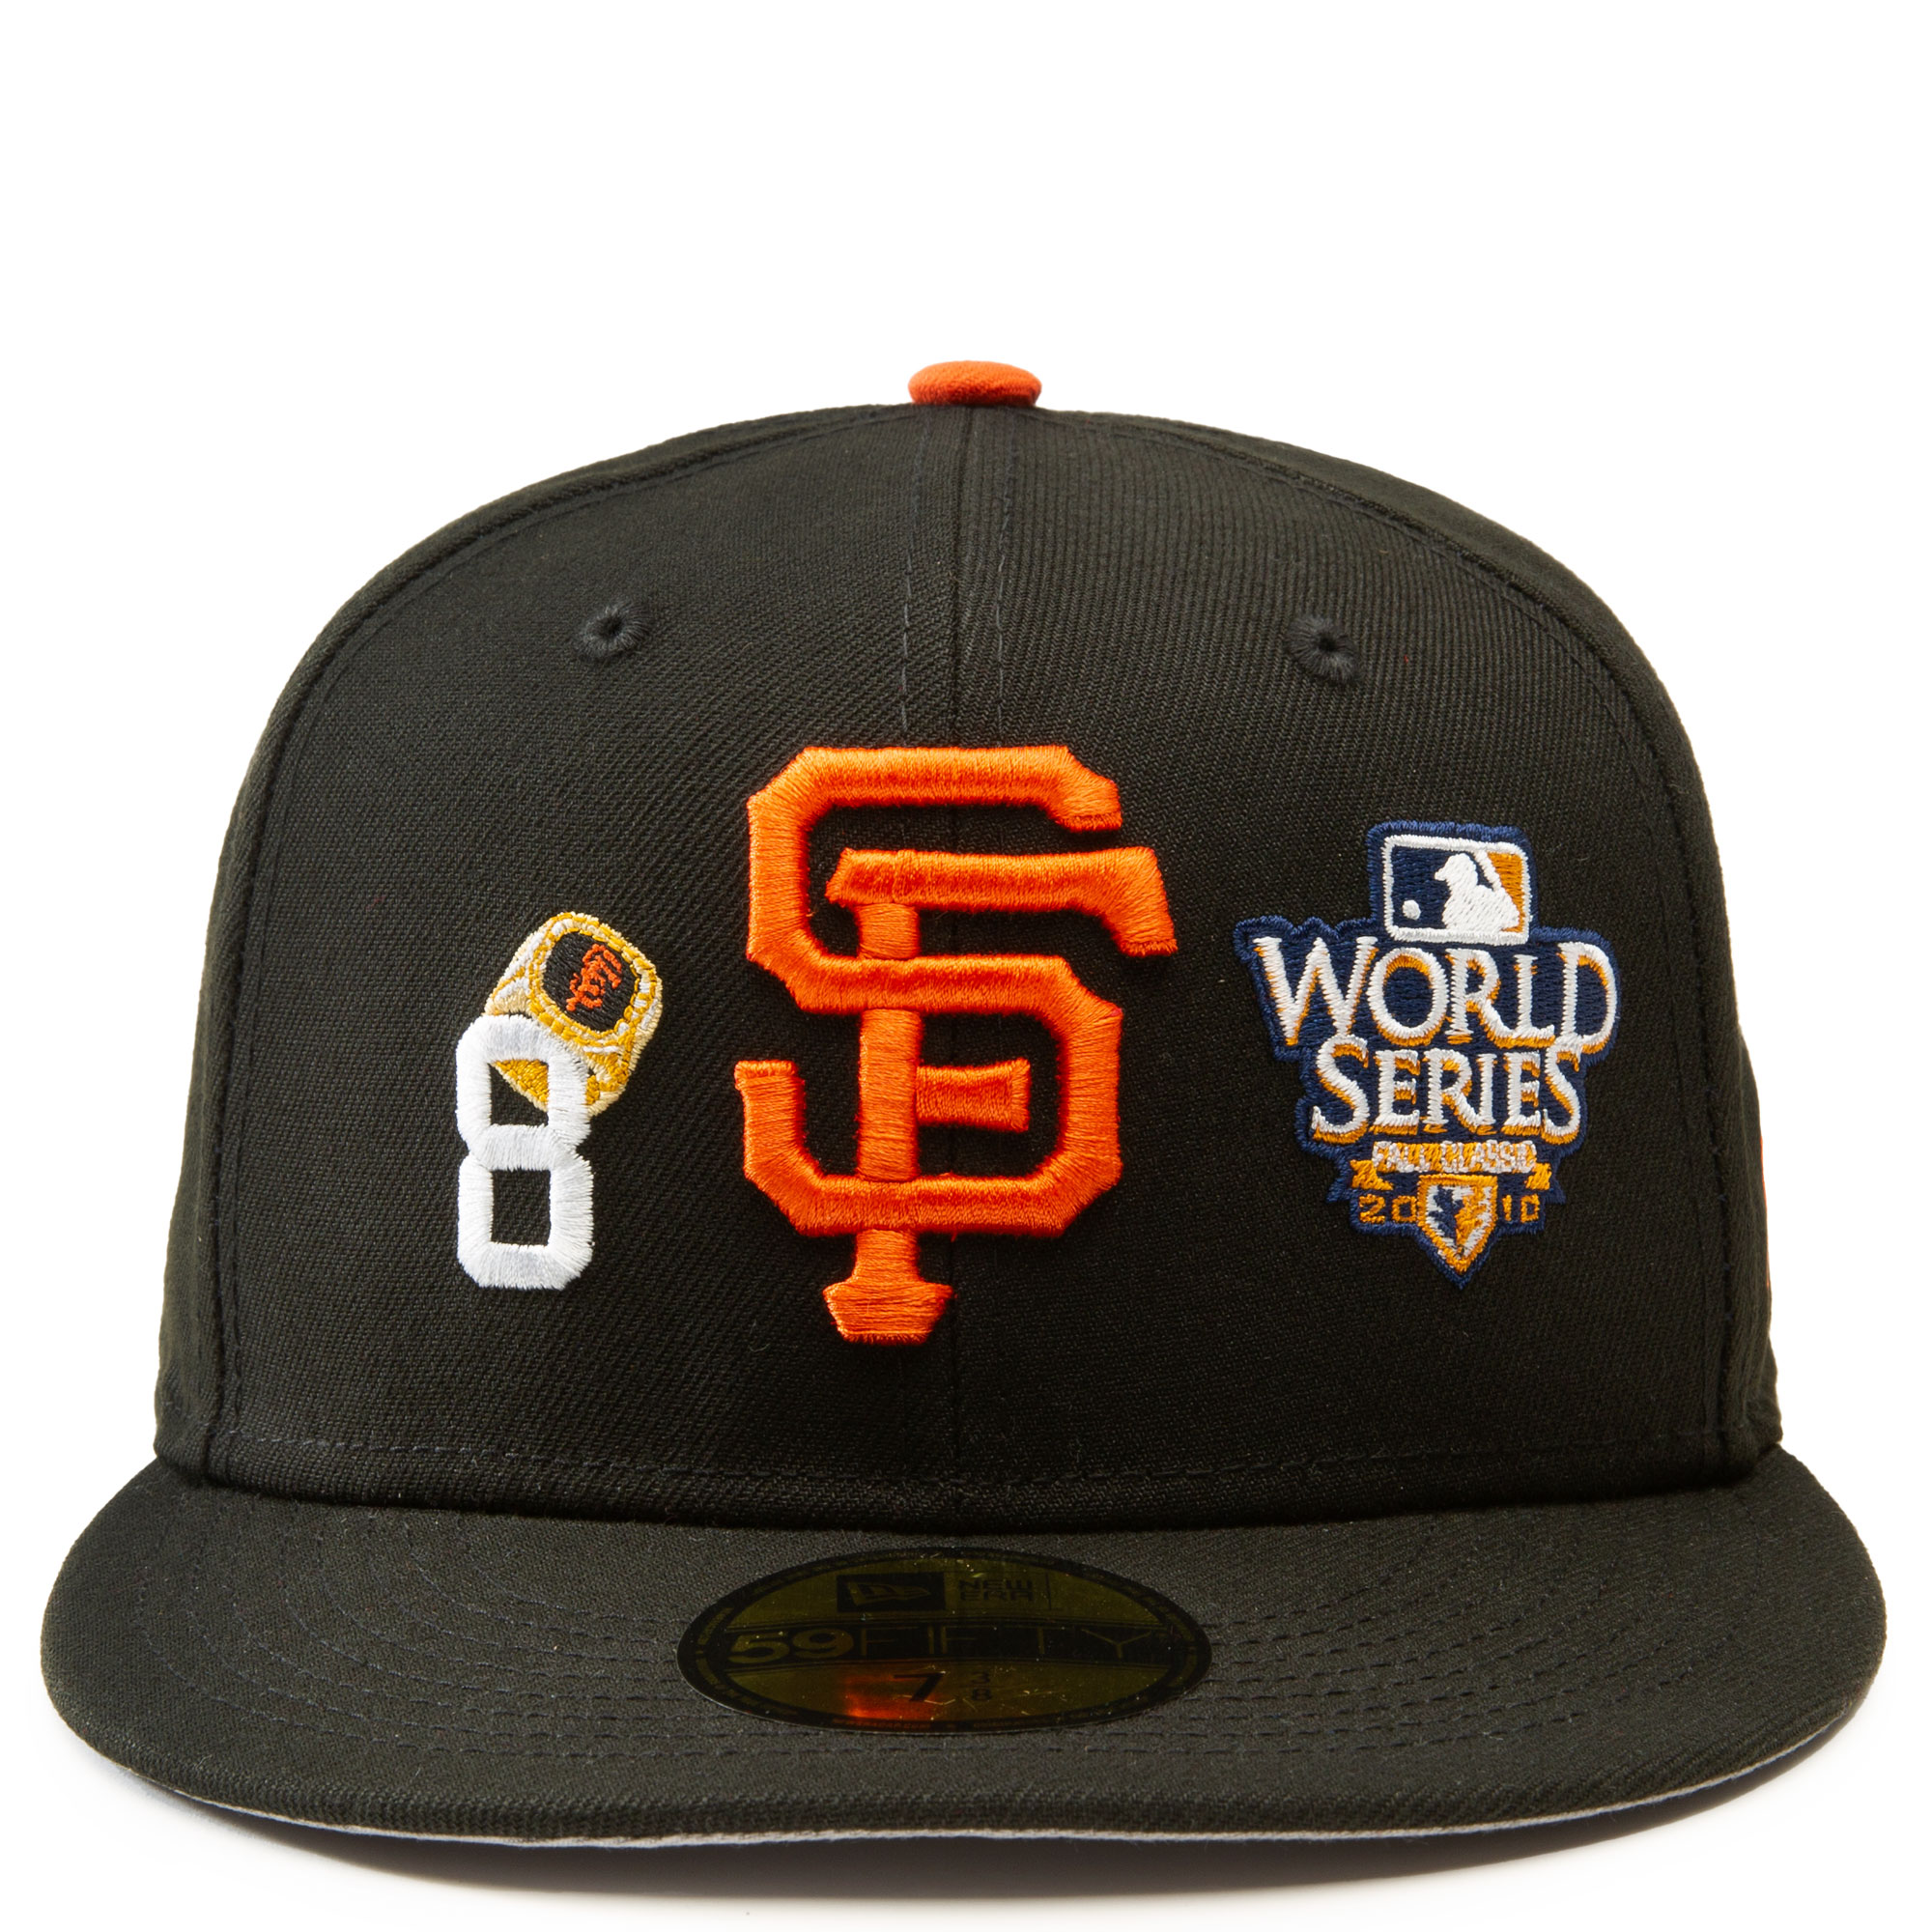 New Era San Francisco Giants World Series Champions 2010 Gold Edition  59Fifty Fitted Cap